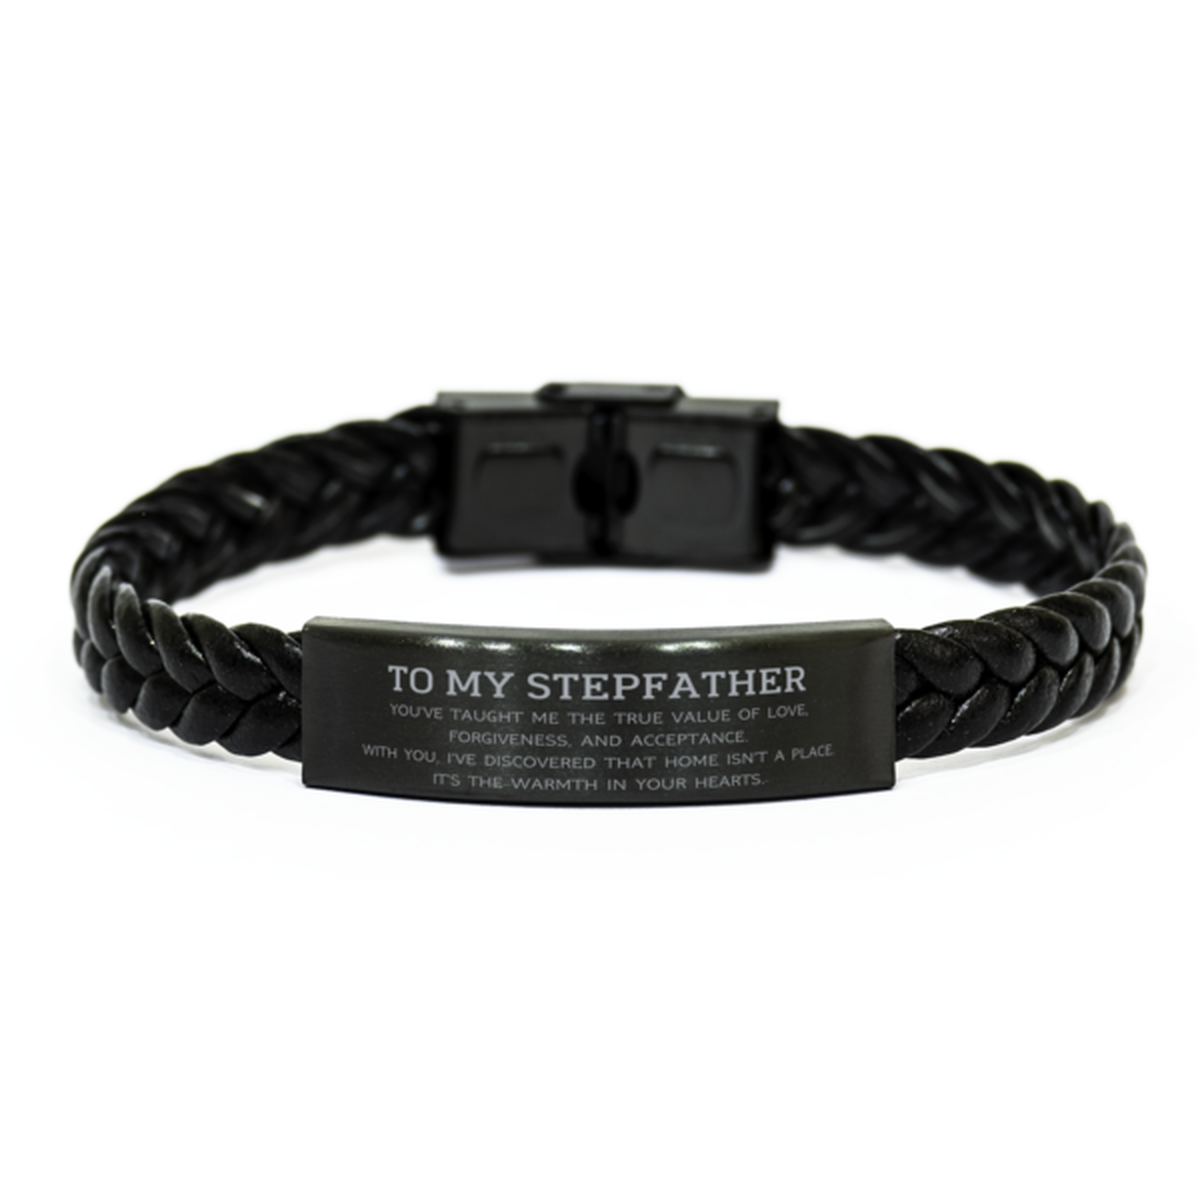 To My Stepfather Gifts, You've taught me the true value of love, Thank You Gifts For Stepfather, Birthday Braided Leather Bracelet For Stepfather